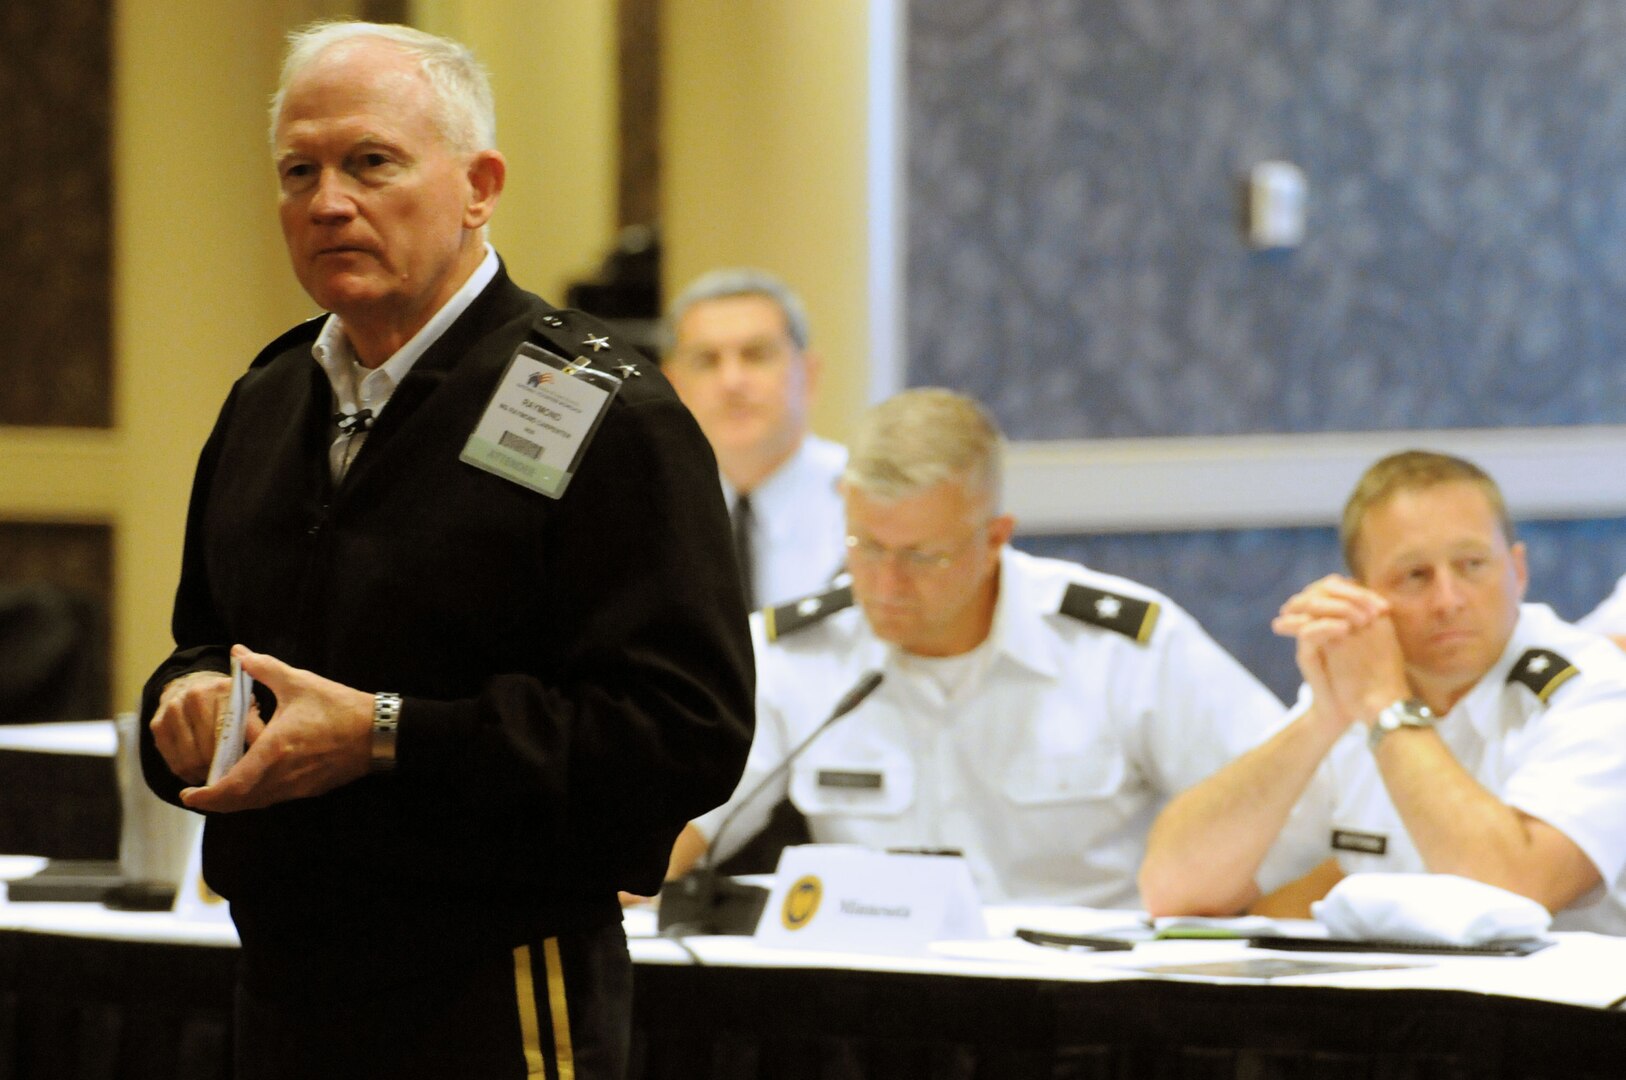 Army Maj. Gen. Raymond Carpenter, acting director of the Army National Guard, speaks during a Guard Senior Leadership Conference in Louisville, Ky., July 24, 2011.